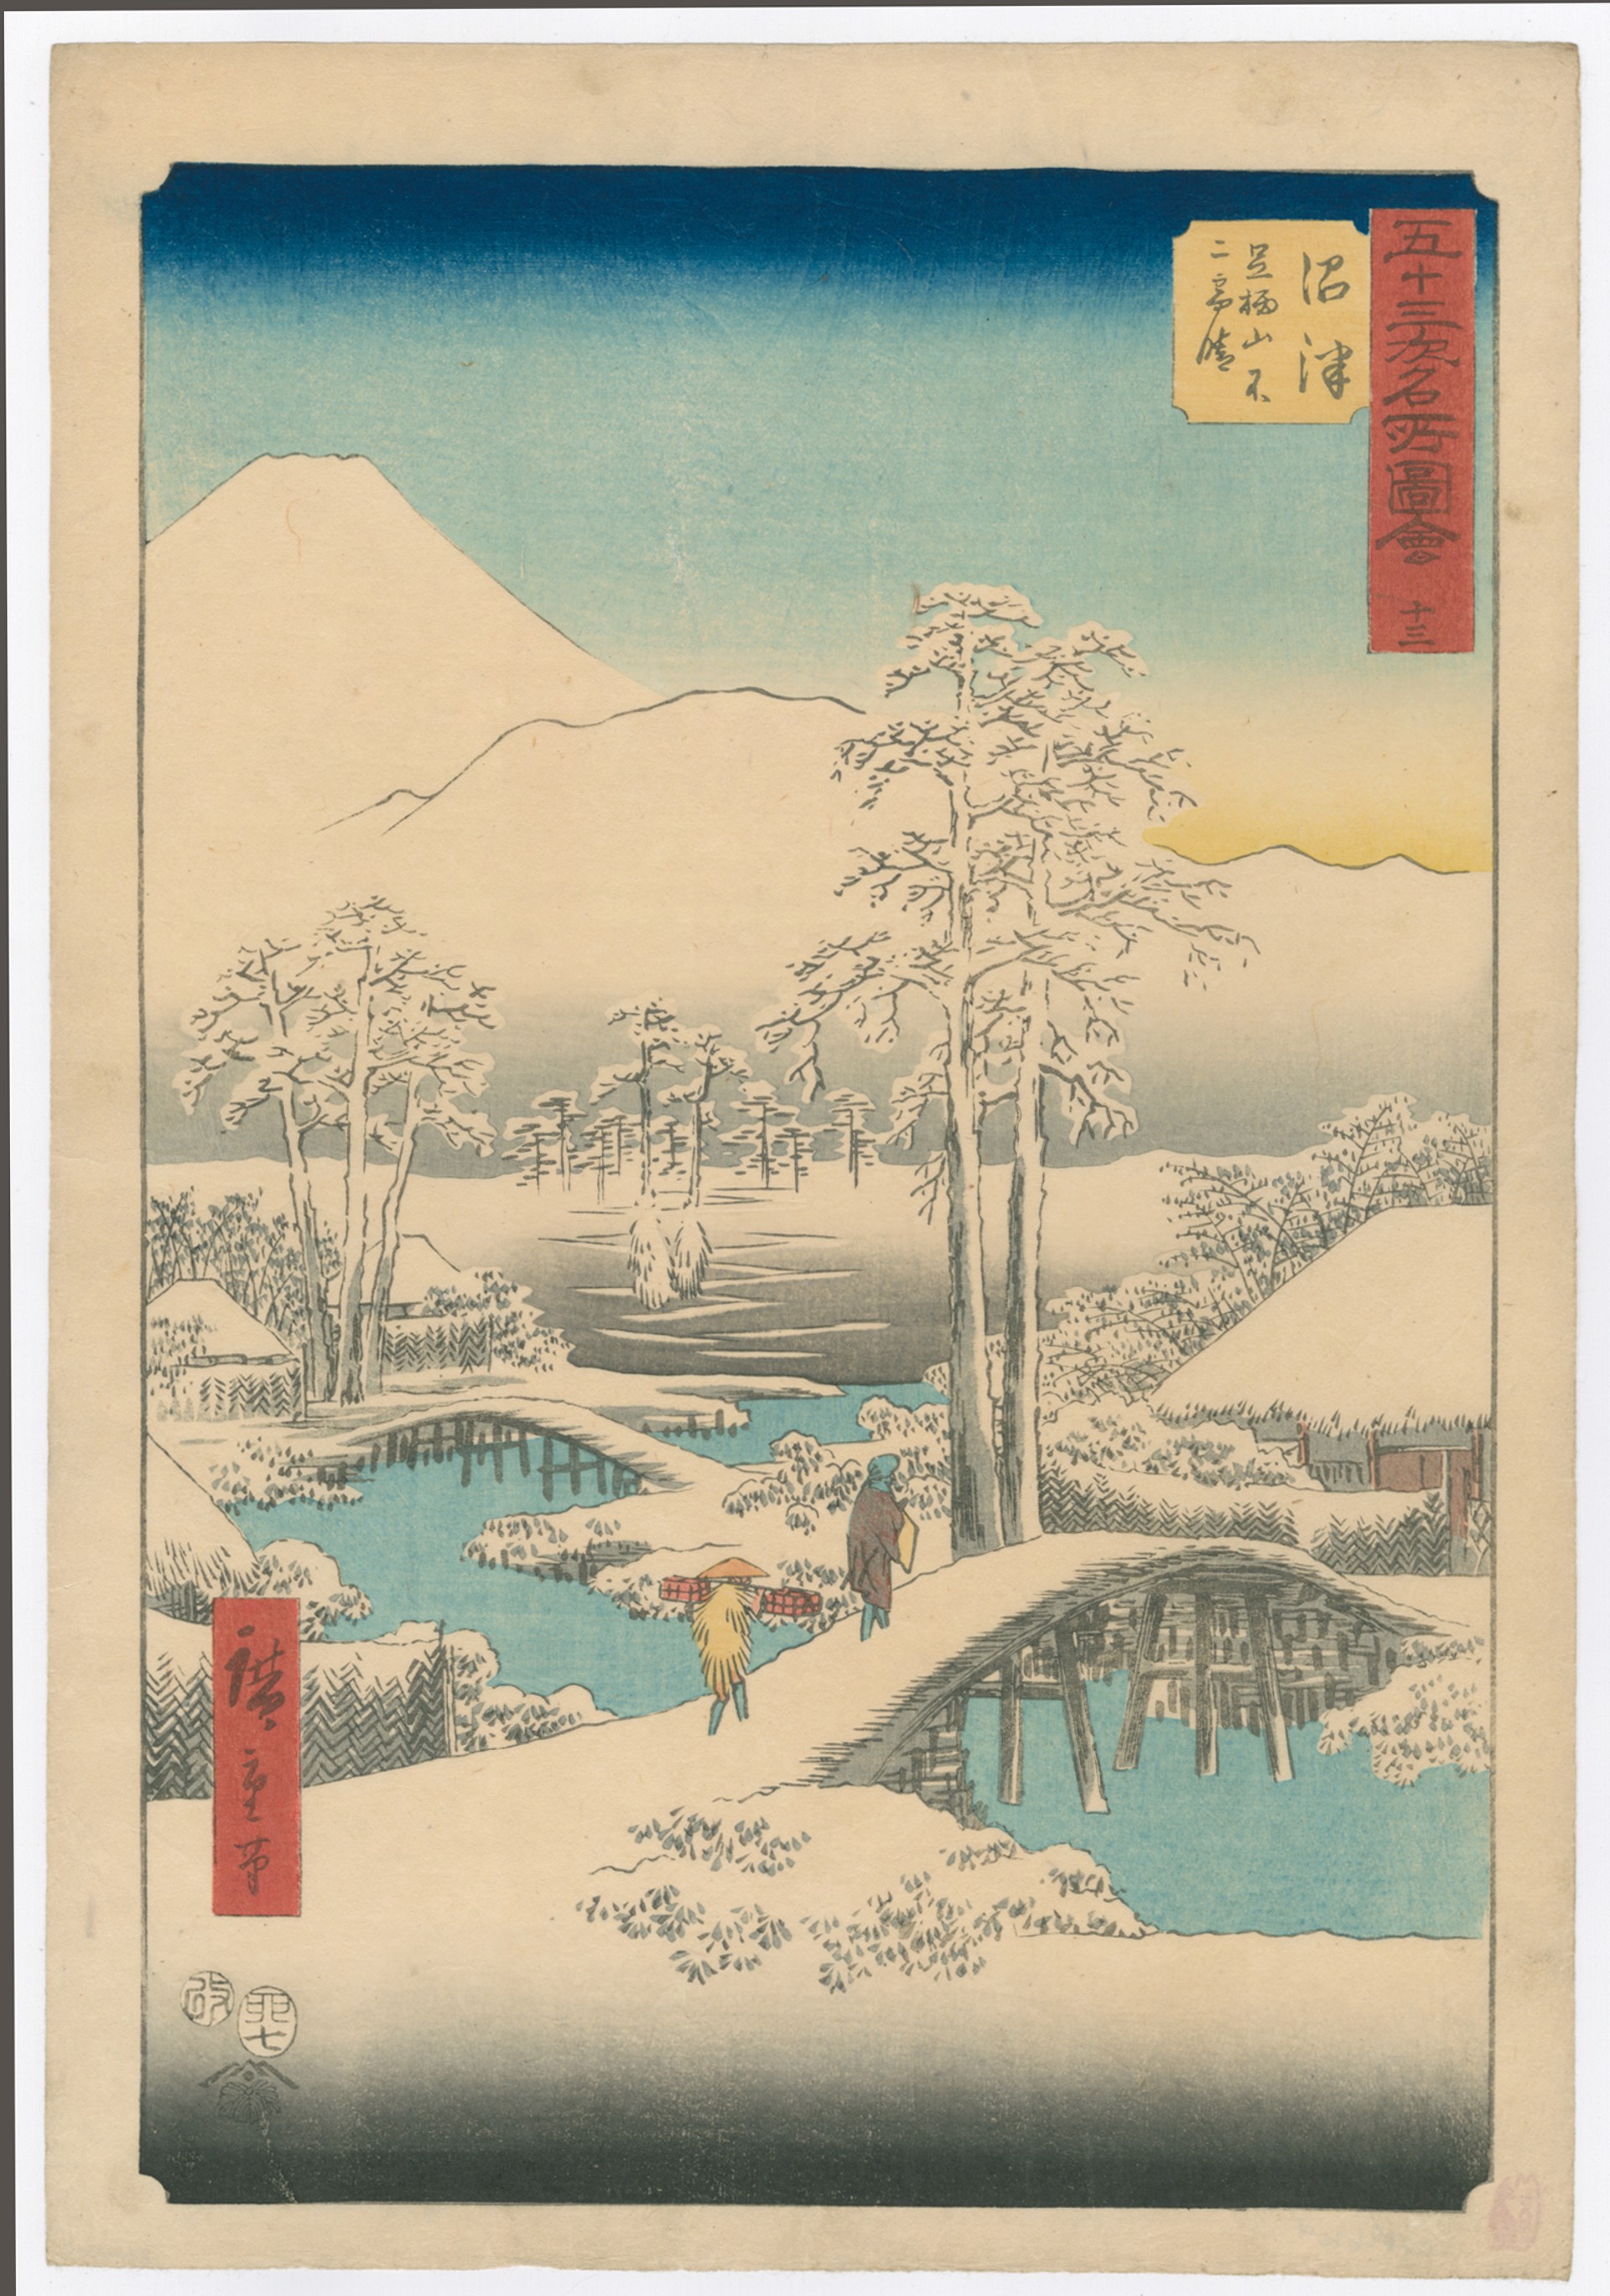 #13 Numazu - Fuji in Clear Weather after Snow Upright or Vertical Tokaido by Hiroshige